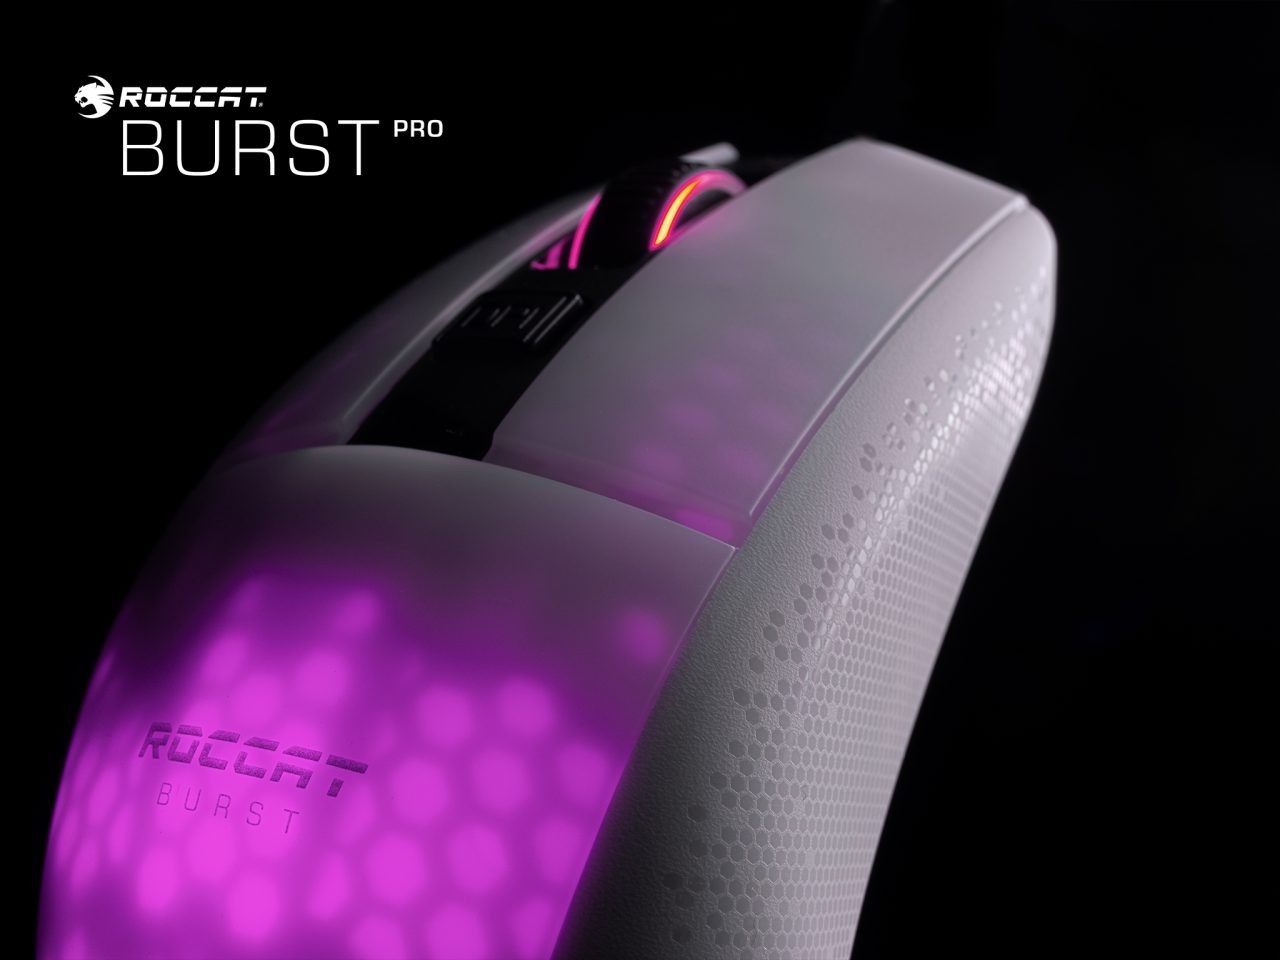 Burst Pro Gaming Mouse (ROCCAT)